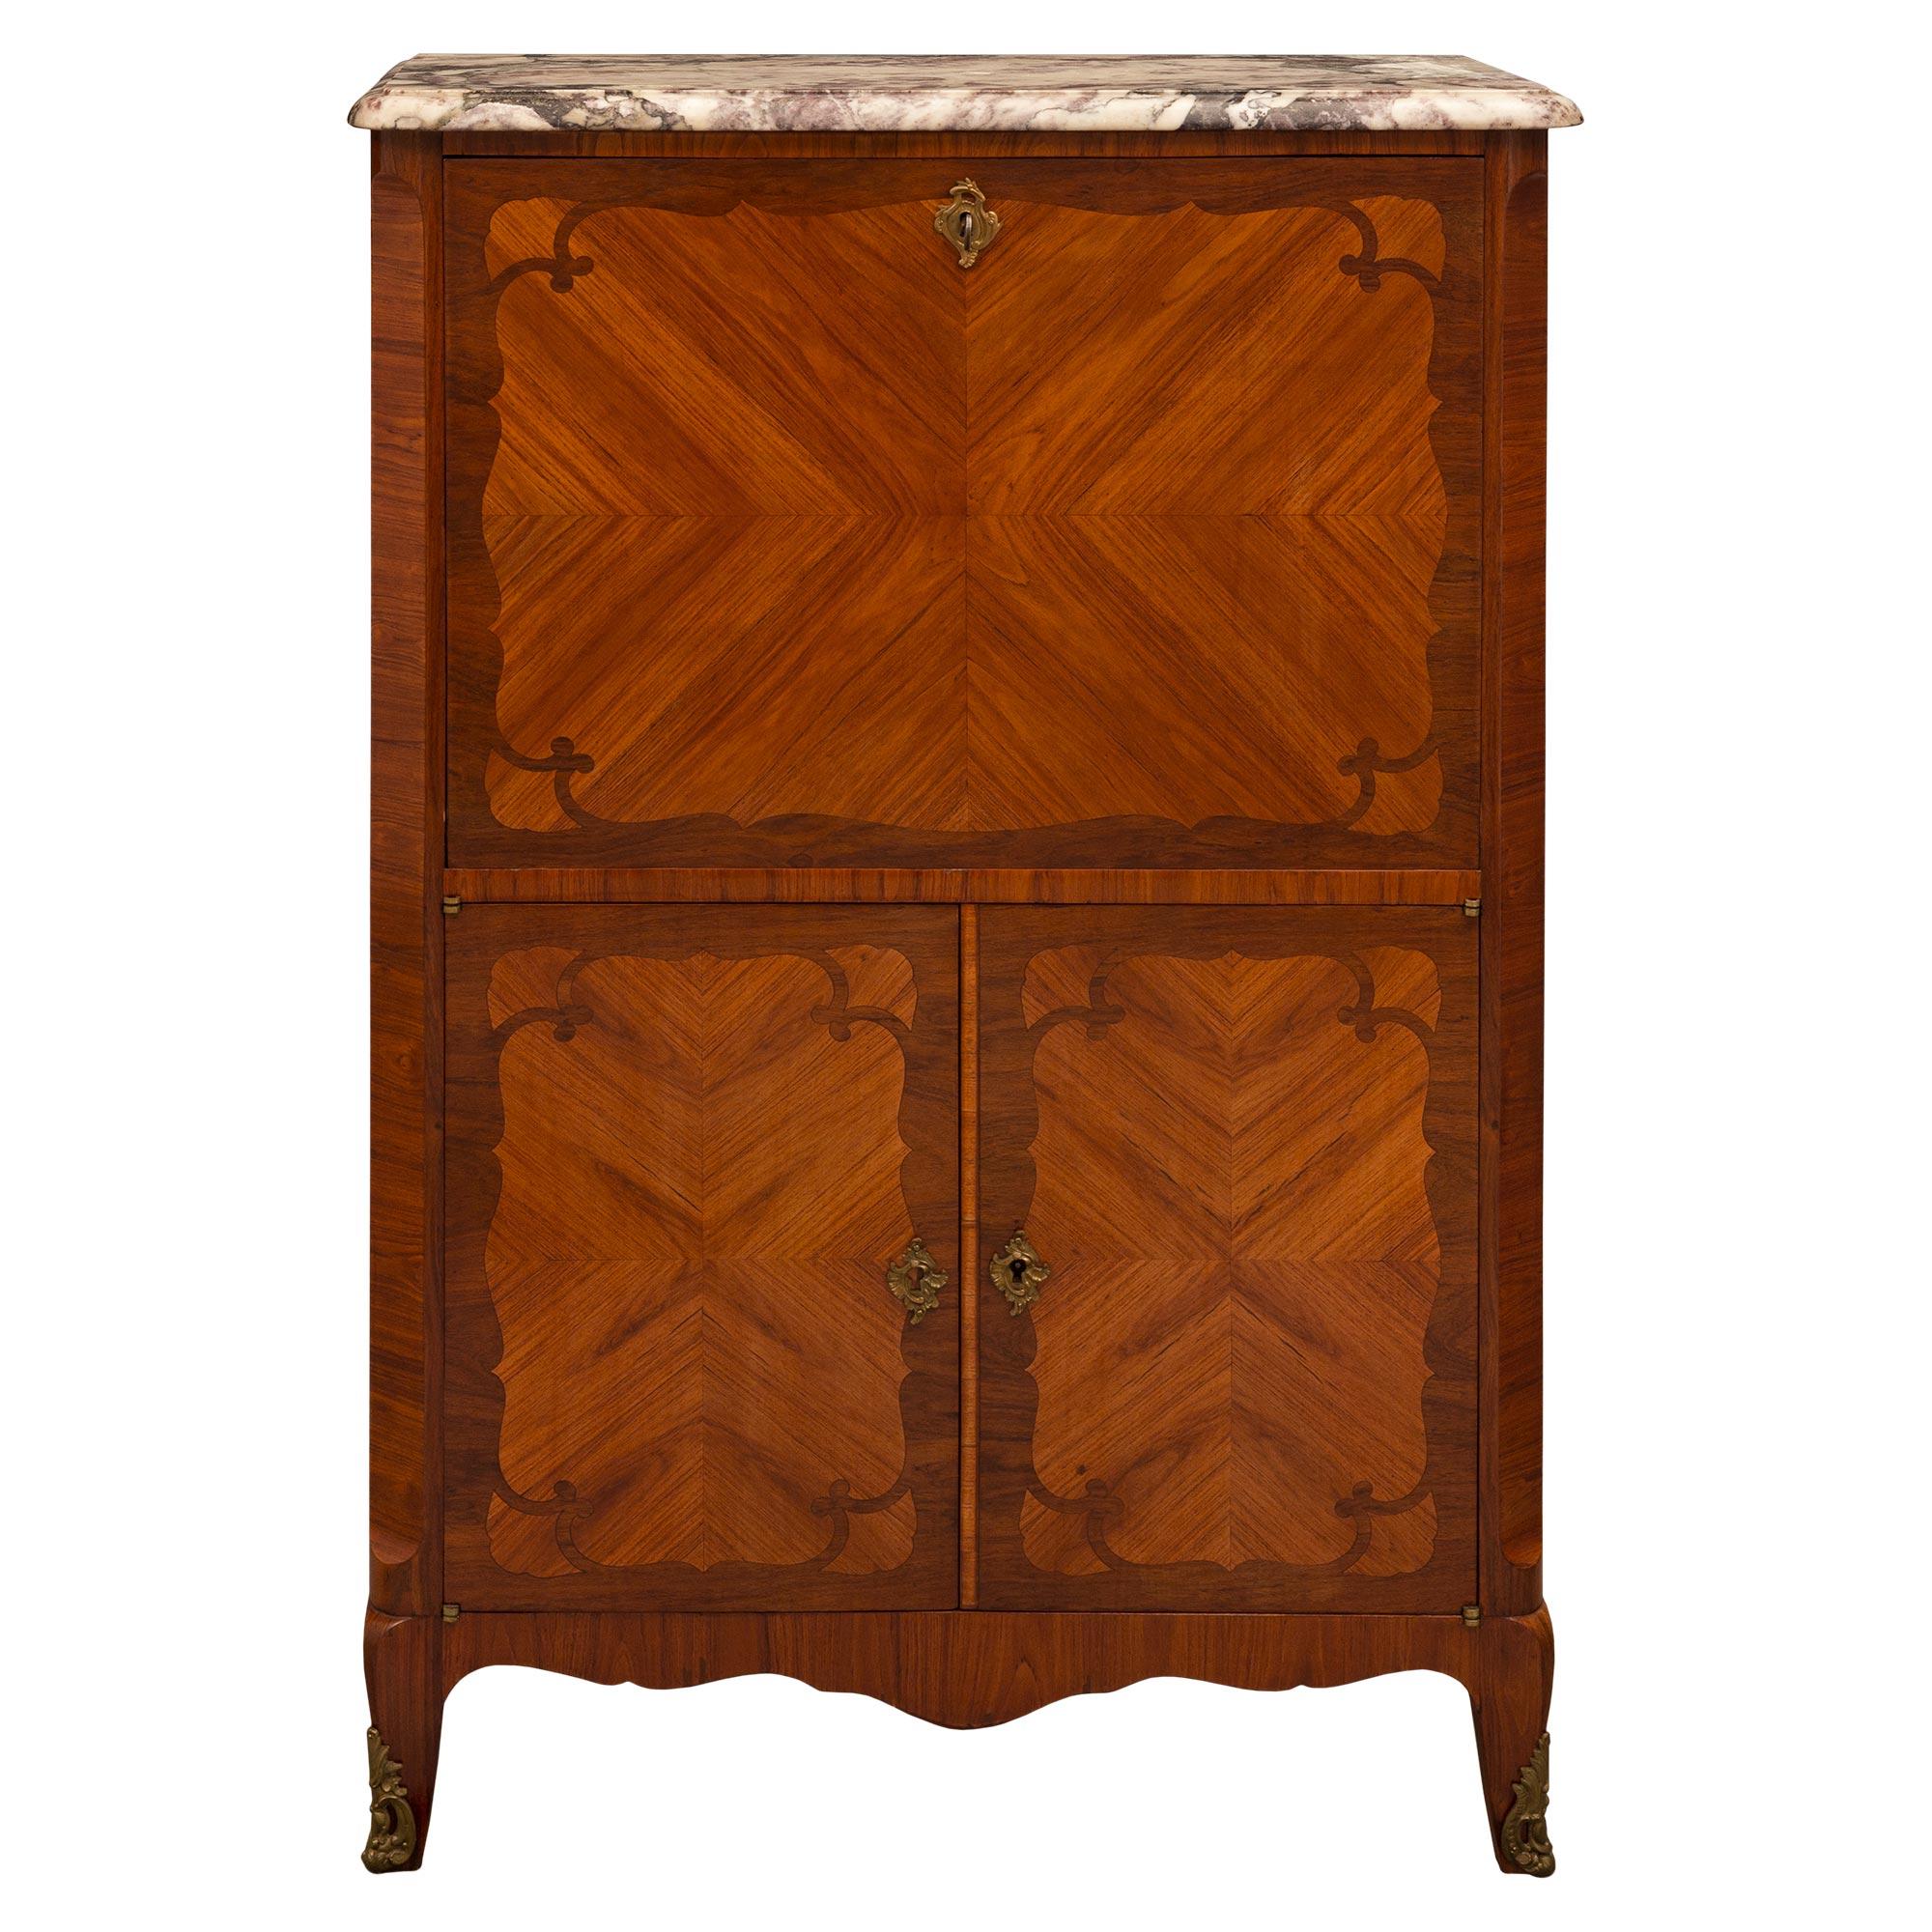 French Mid 19th Century Transitional St. Kingwood, Marble, and Ormolu Secretary